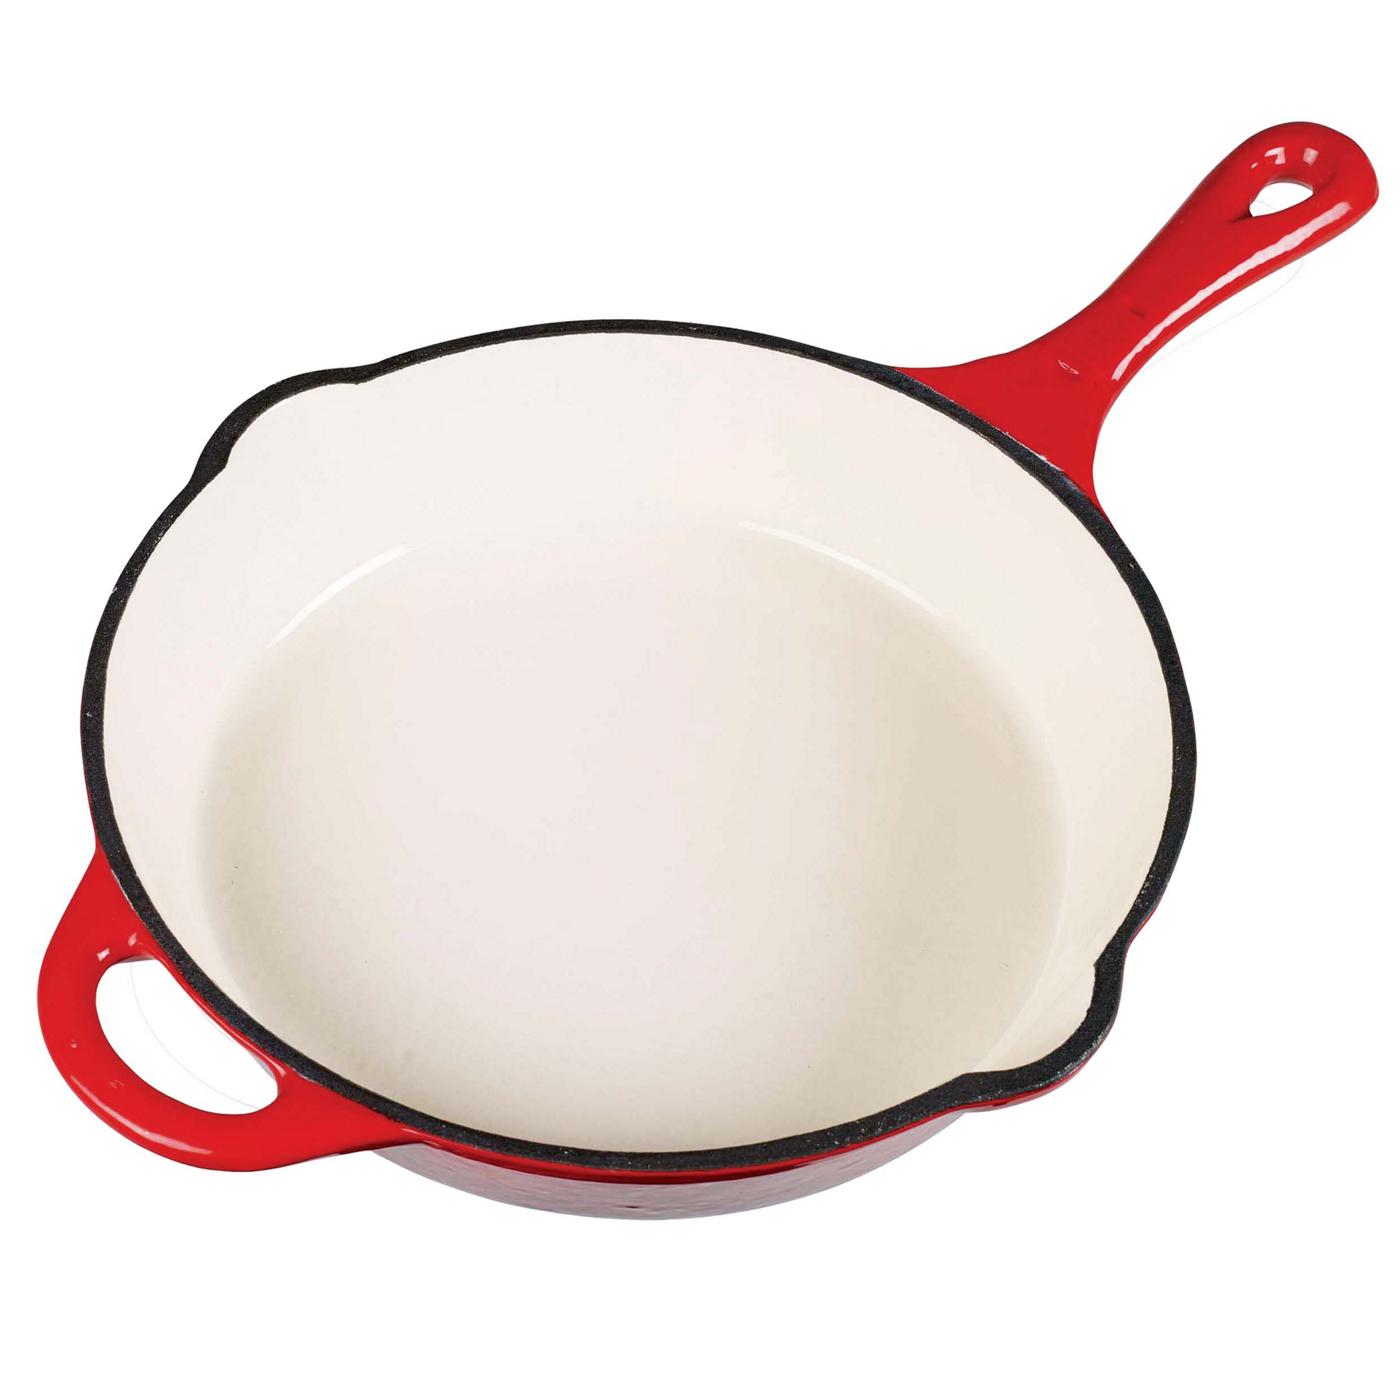 Bella Red Enameled Cast Iron Skillet/Frying Pan 7 3/4 Double Pour